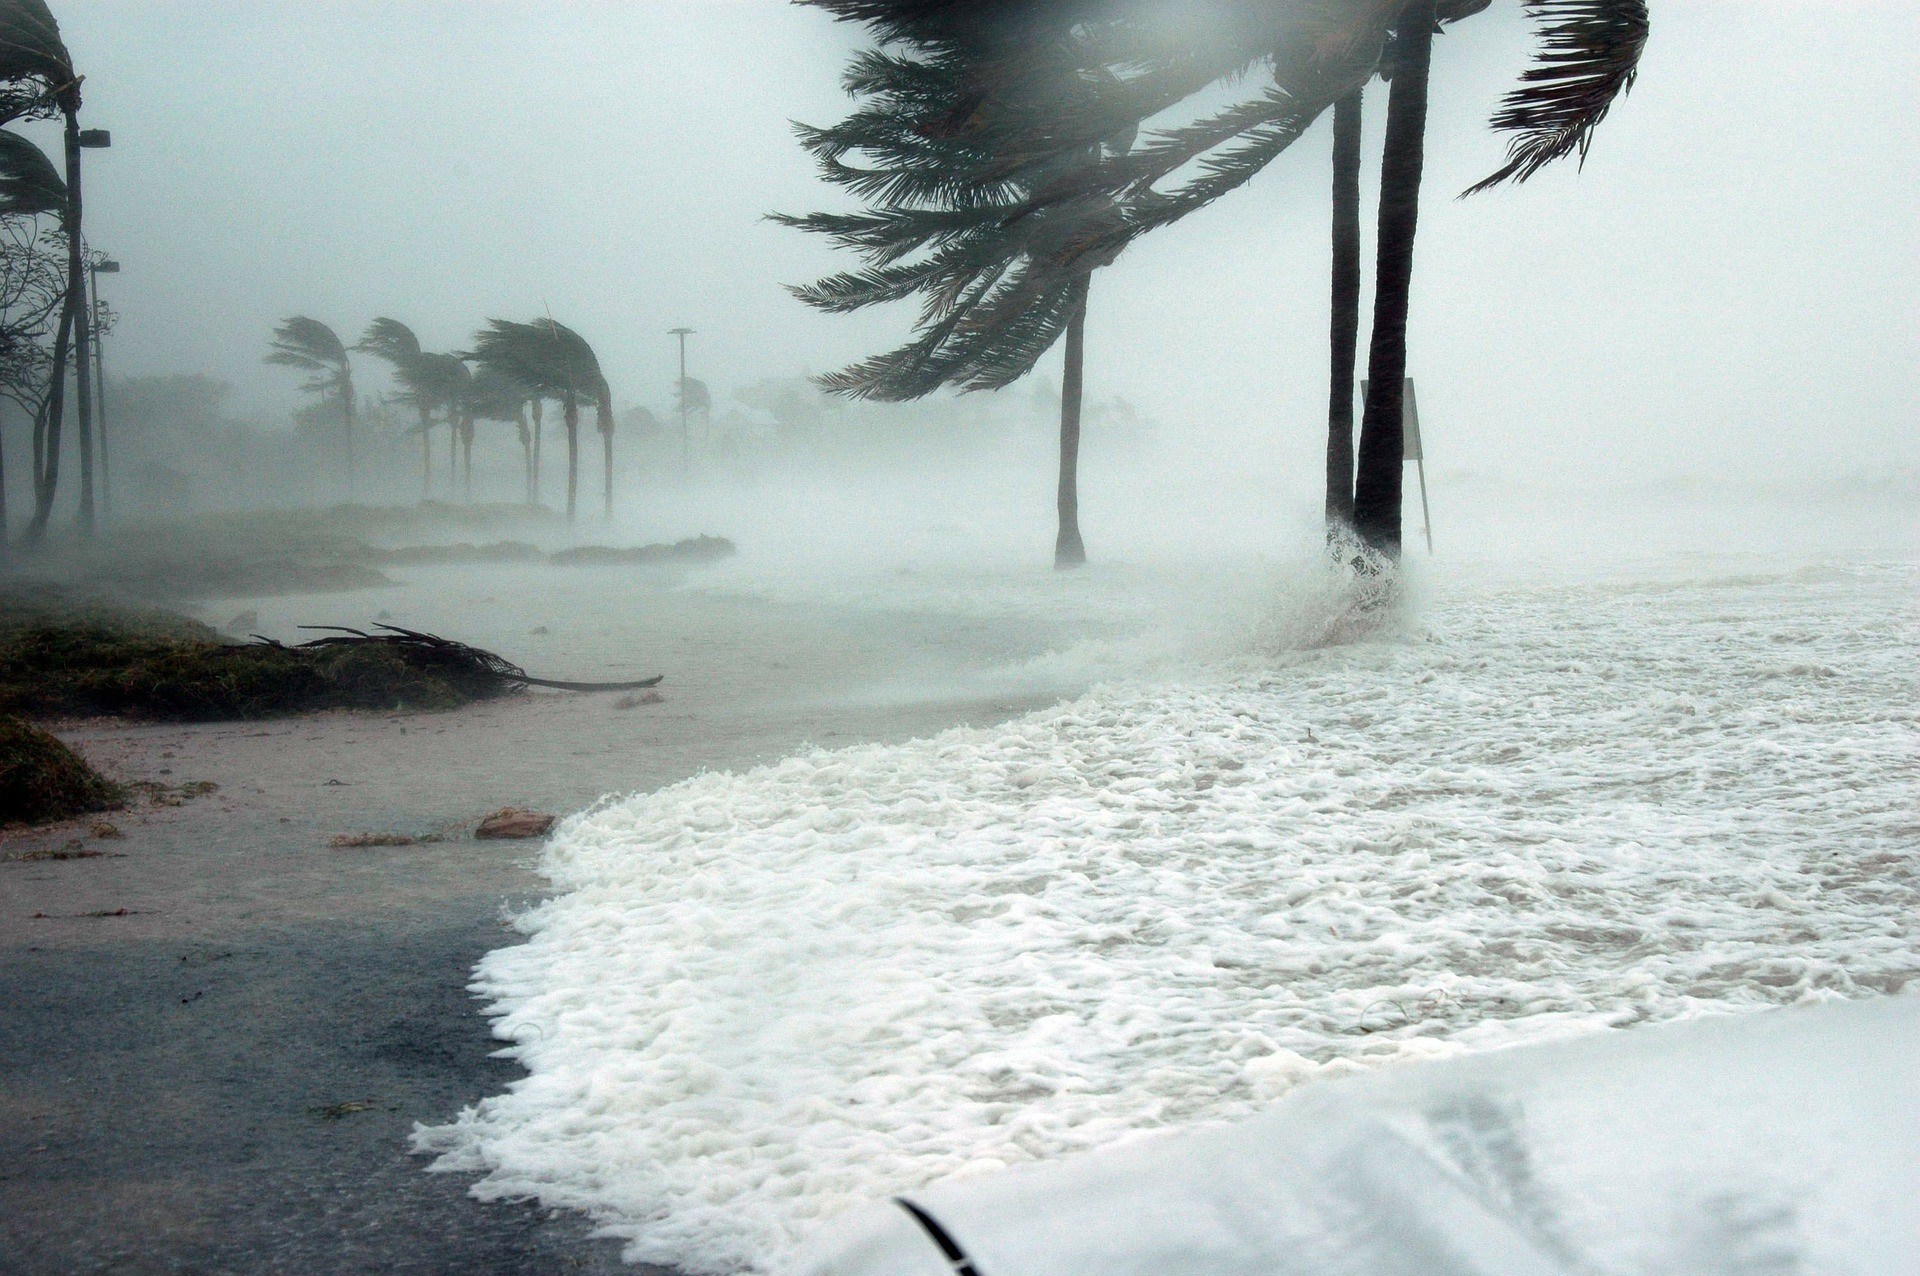 Hurricane Season is Half Over - Be Prepared for Next Year’s